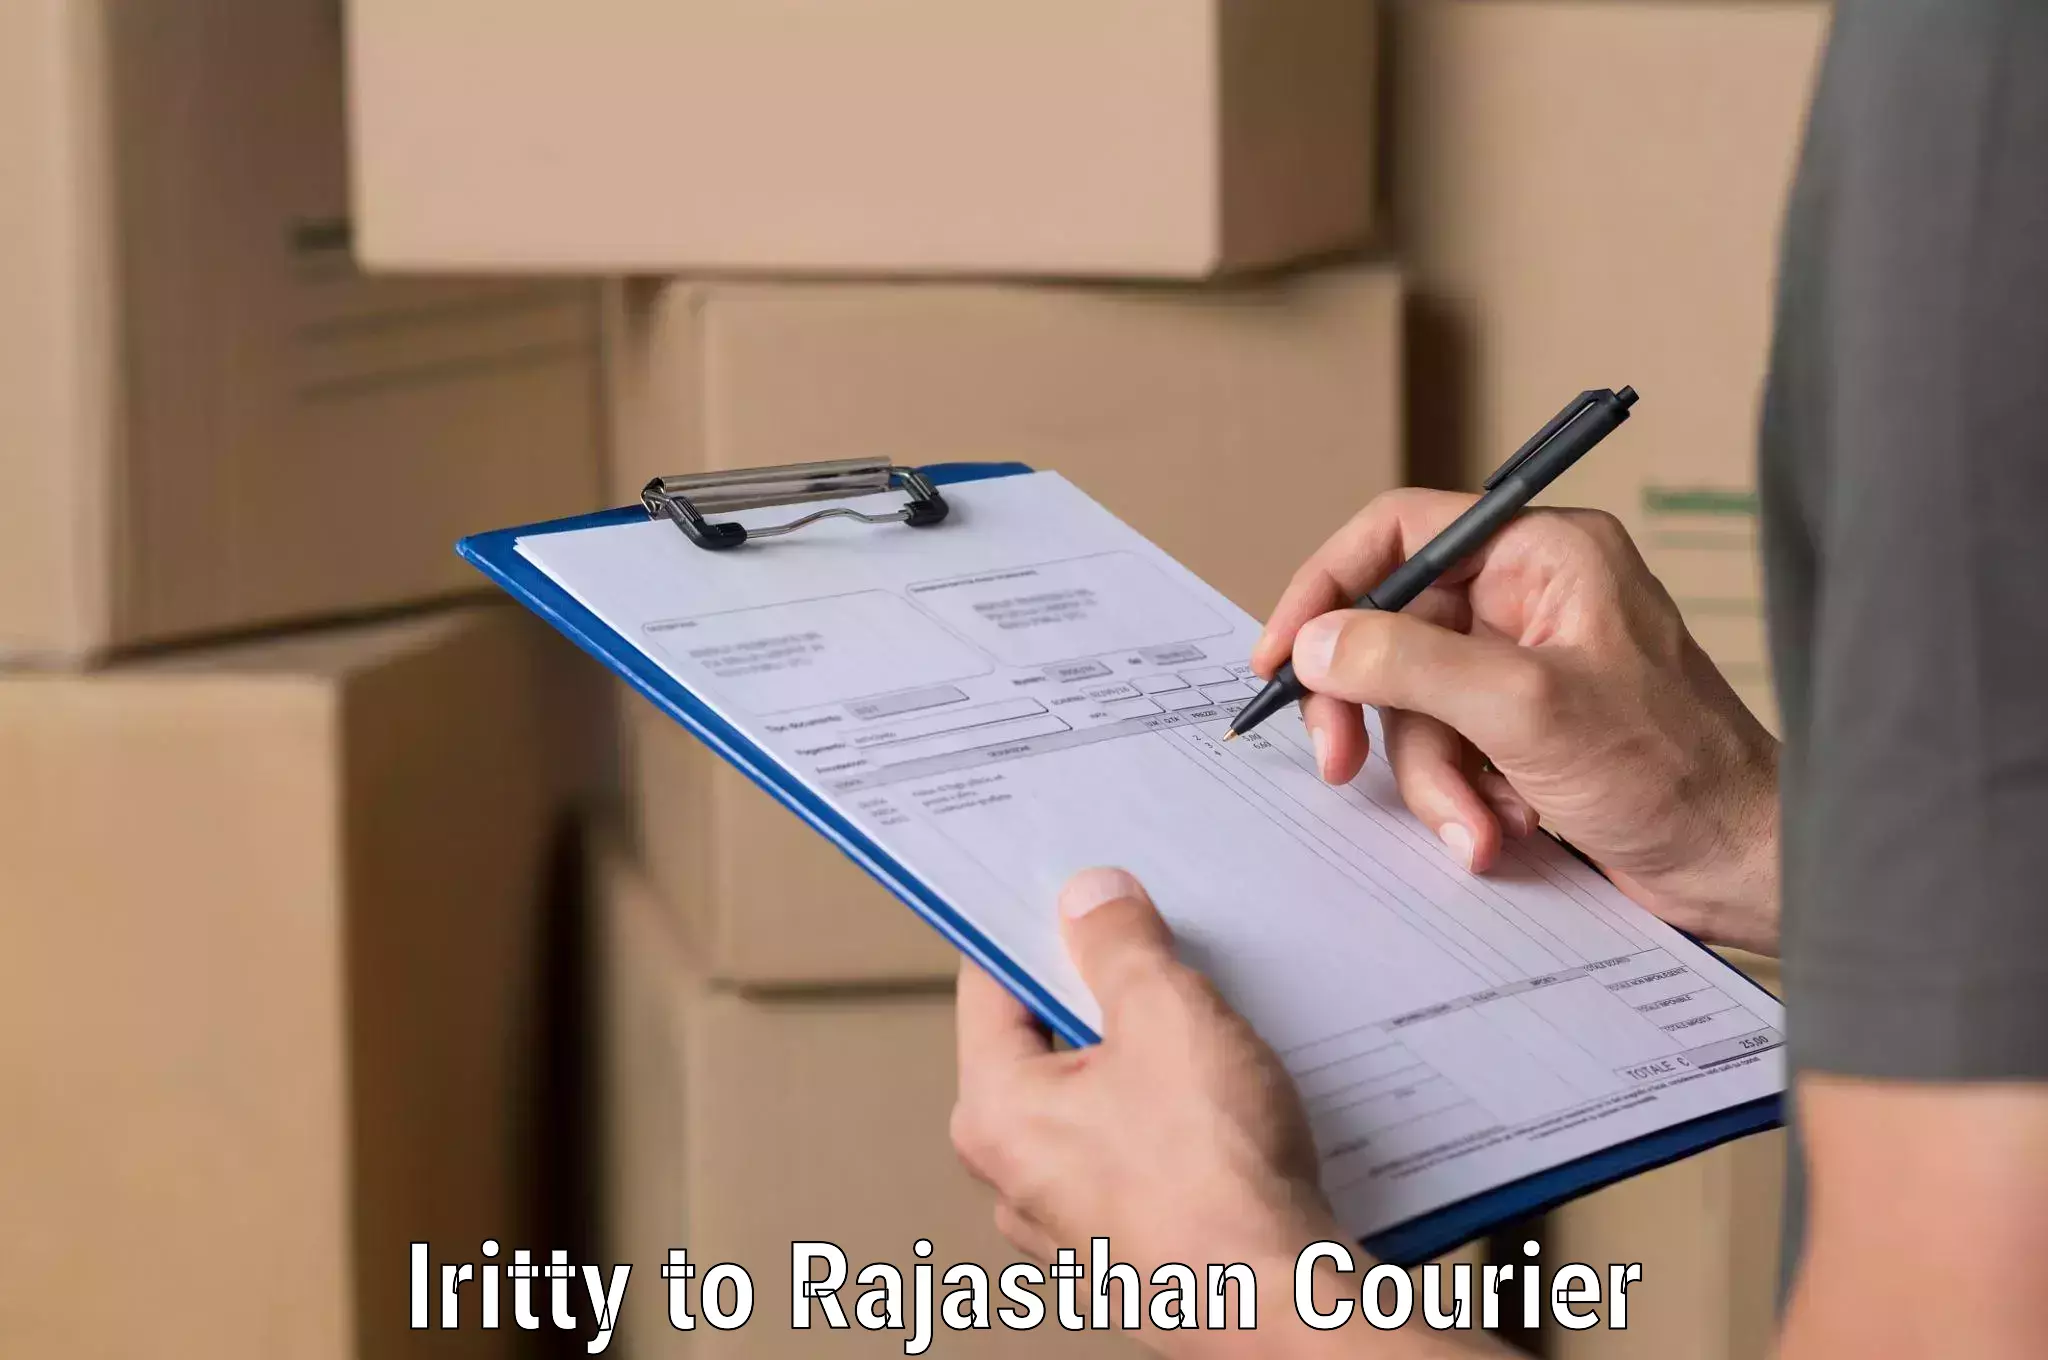 Efficient courier operations Iritty to Mandalgarh